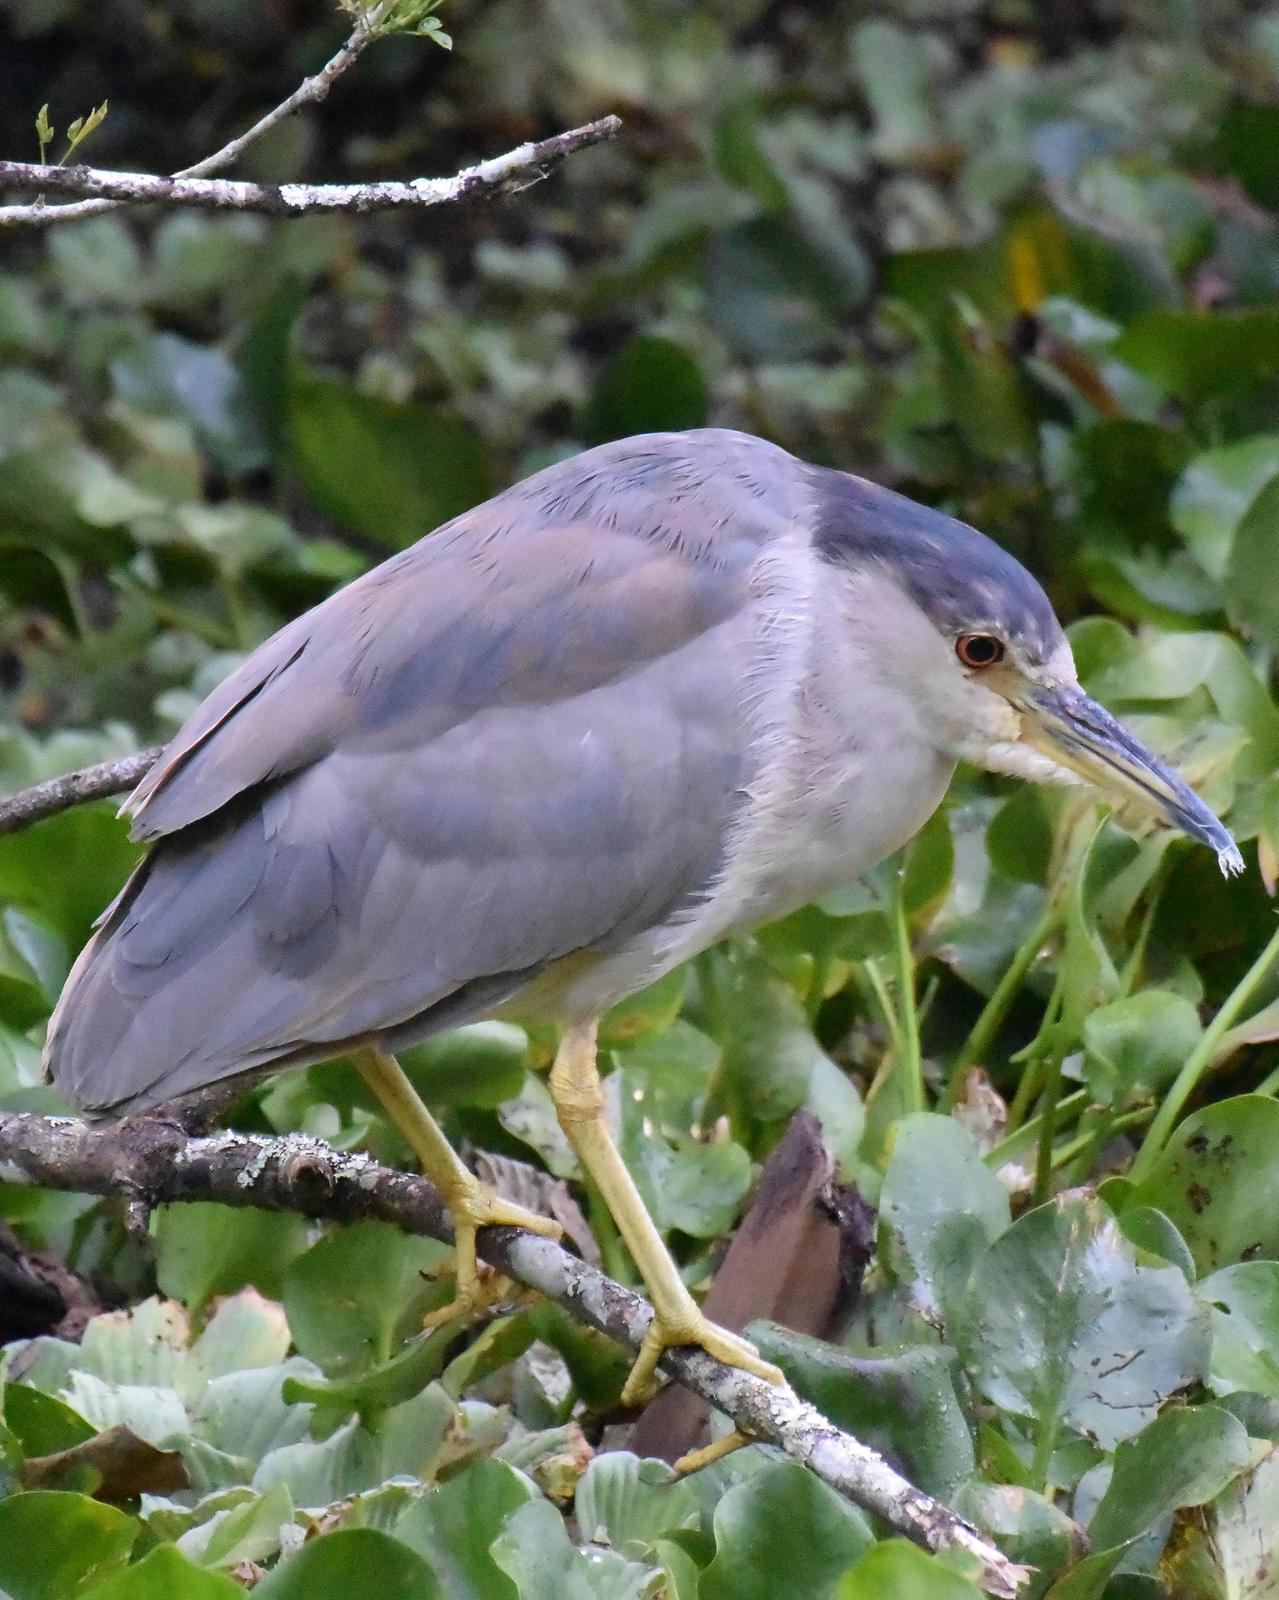 Black-crowned Night-Heron Photo by Emily Percival